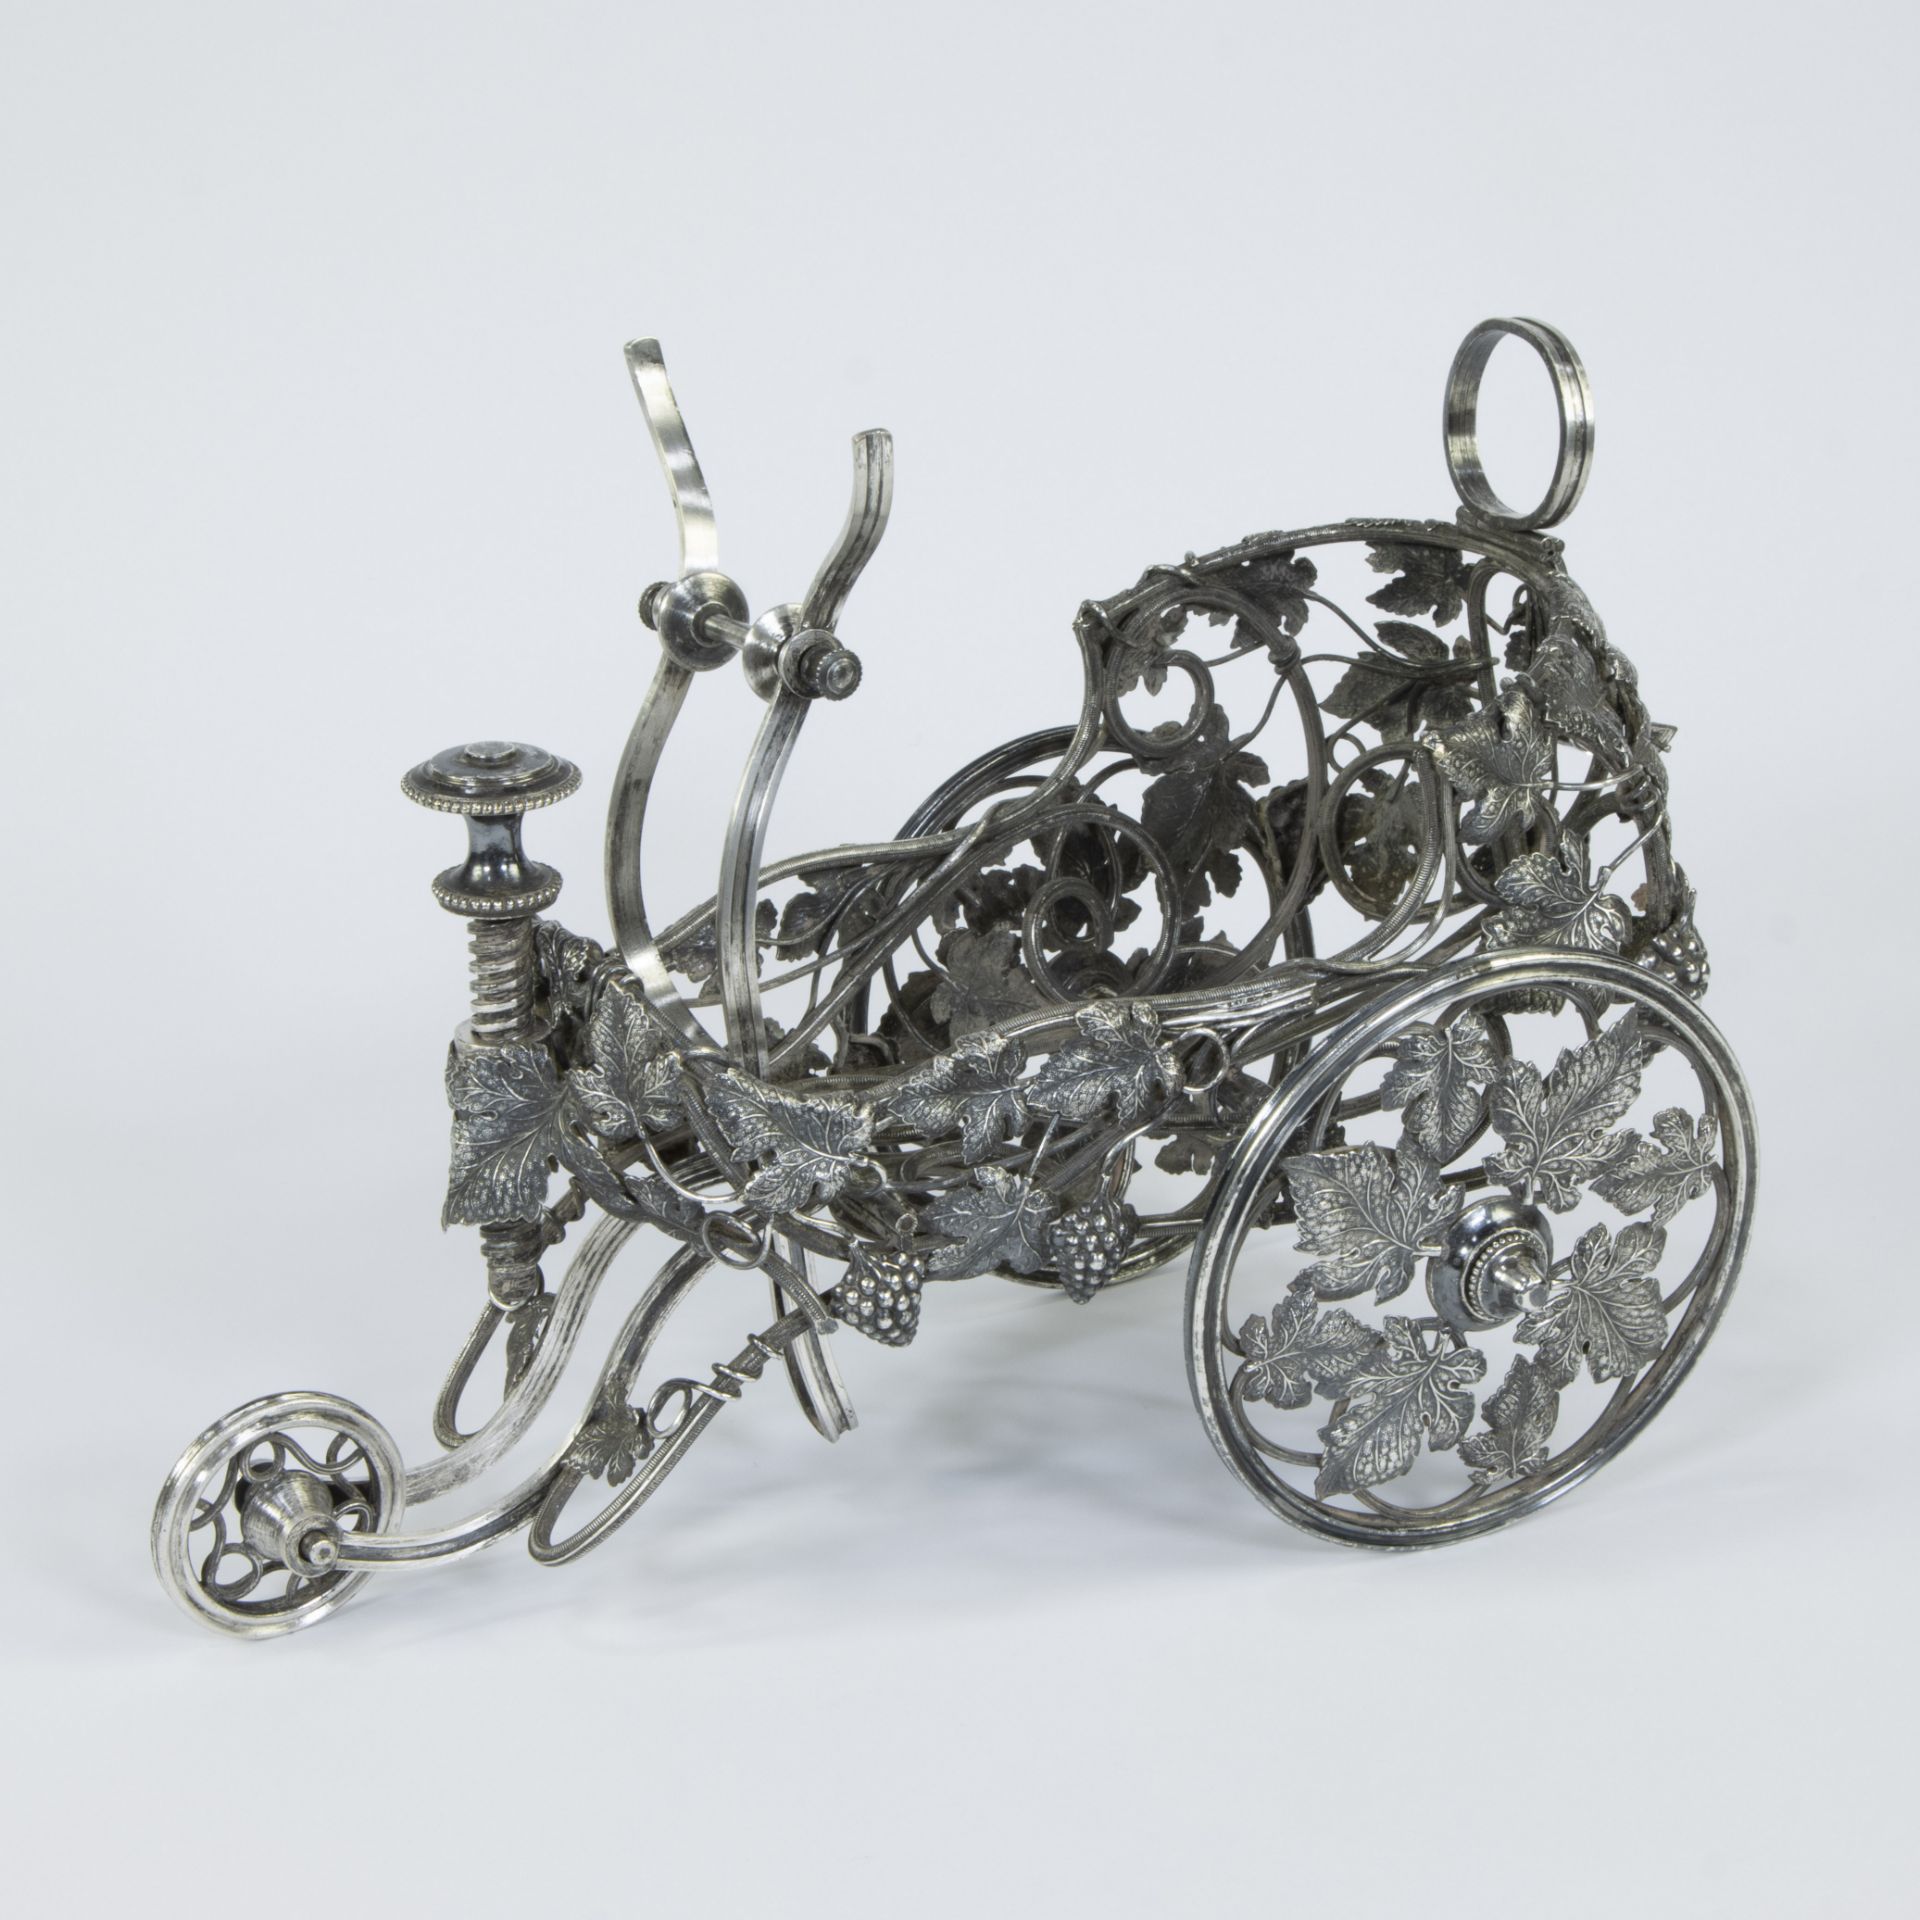 A French large silver-plated bottle chariot on three wheels, decorated with vines and grapes